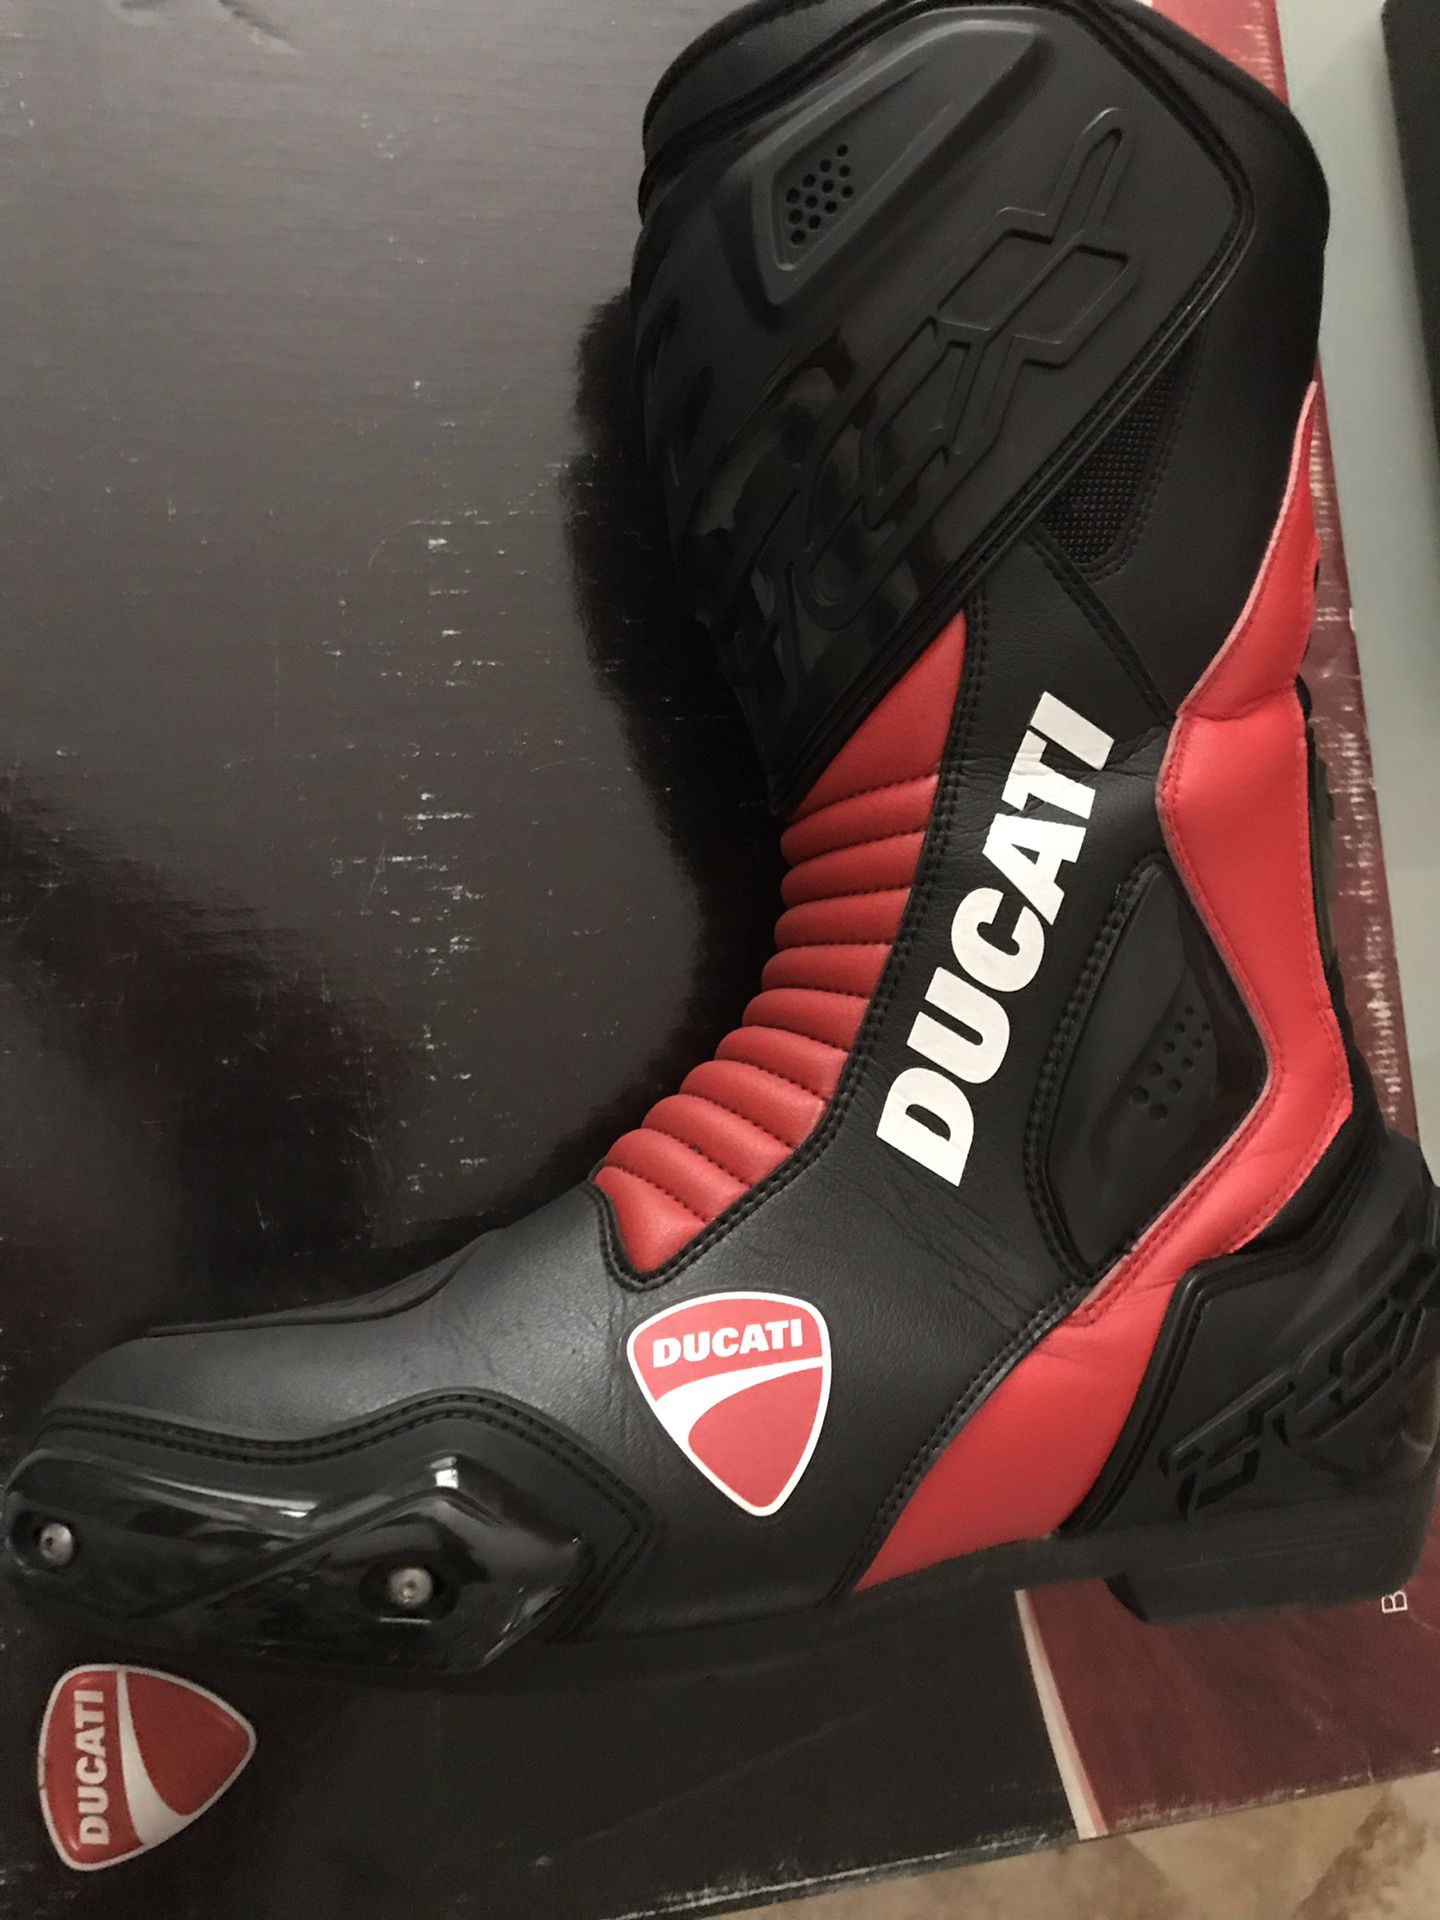 Ducati motorcycle boots armour protection Euro Size 42 USA 9 med